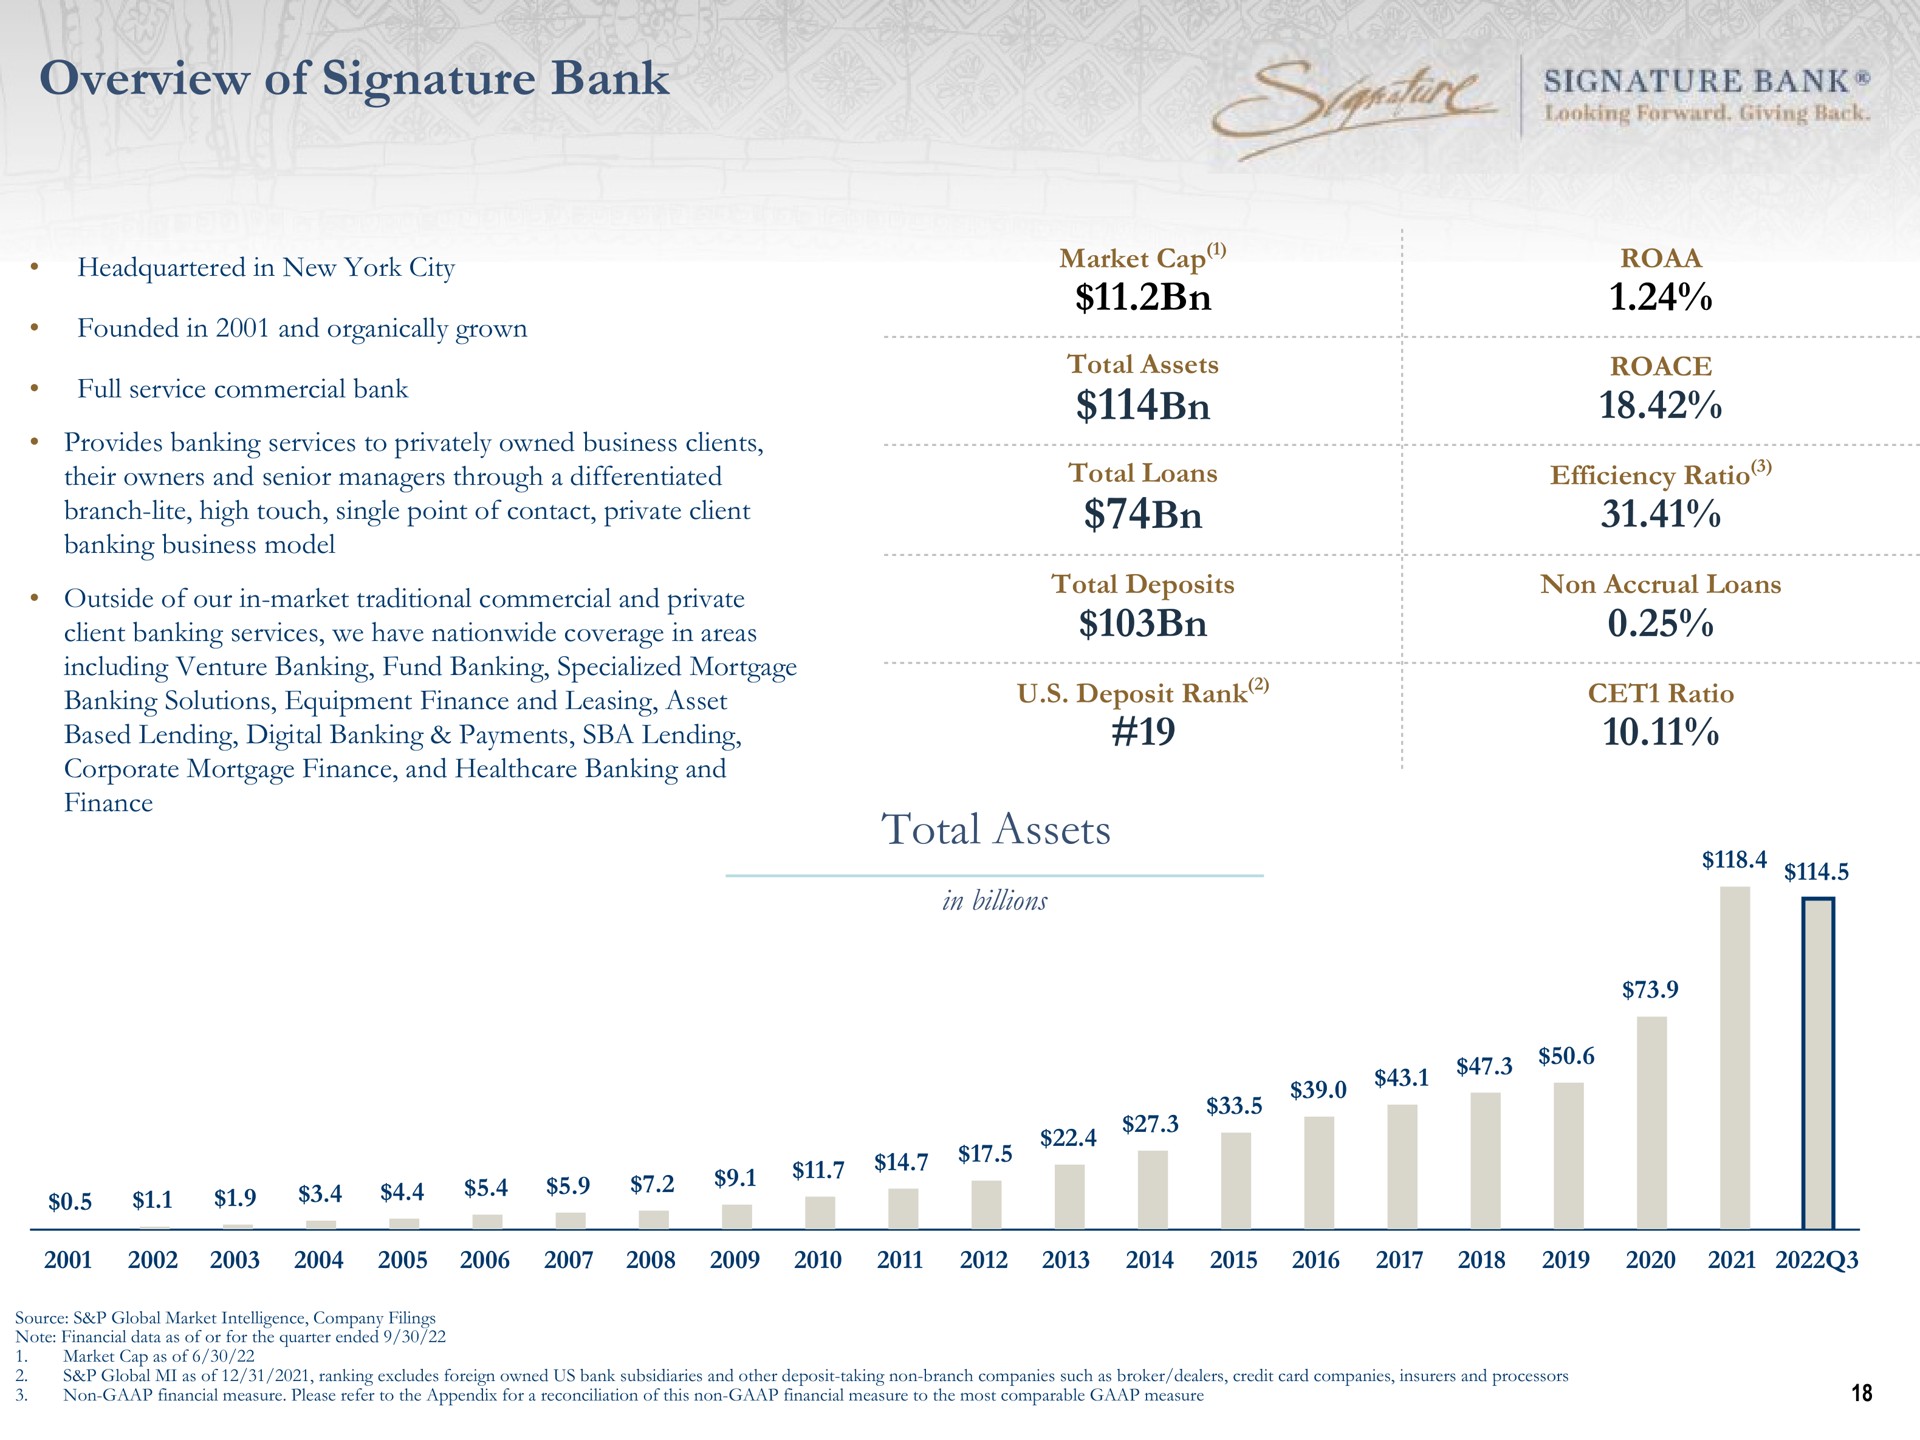 overview of signature bank total assets mill | Signature Bank